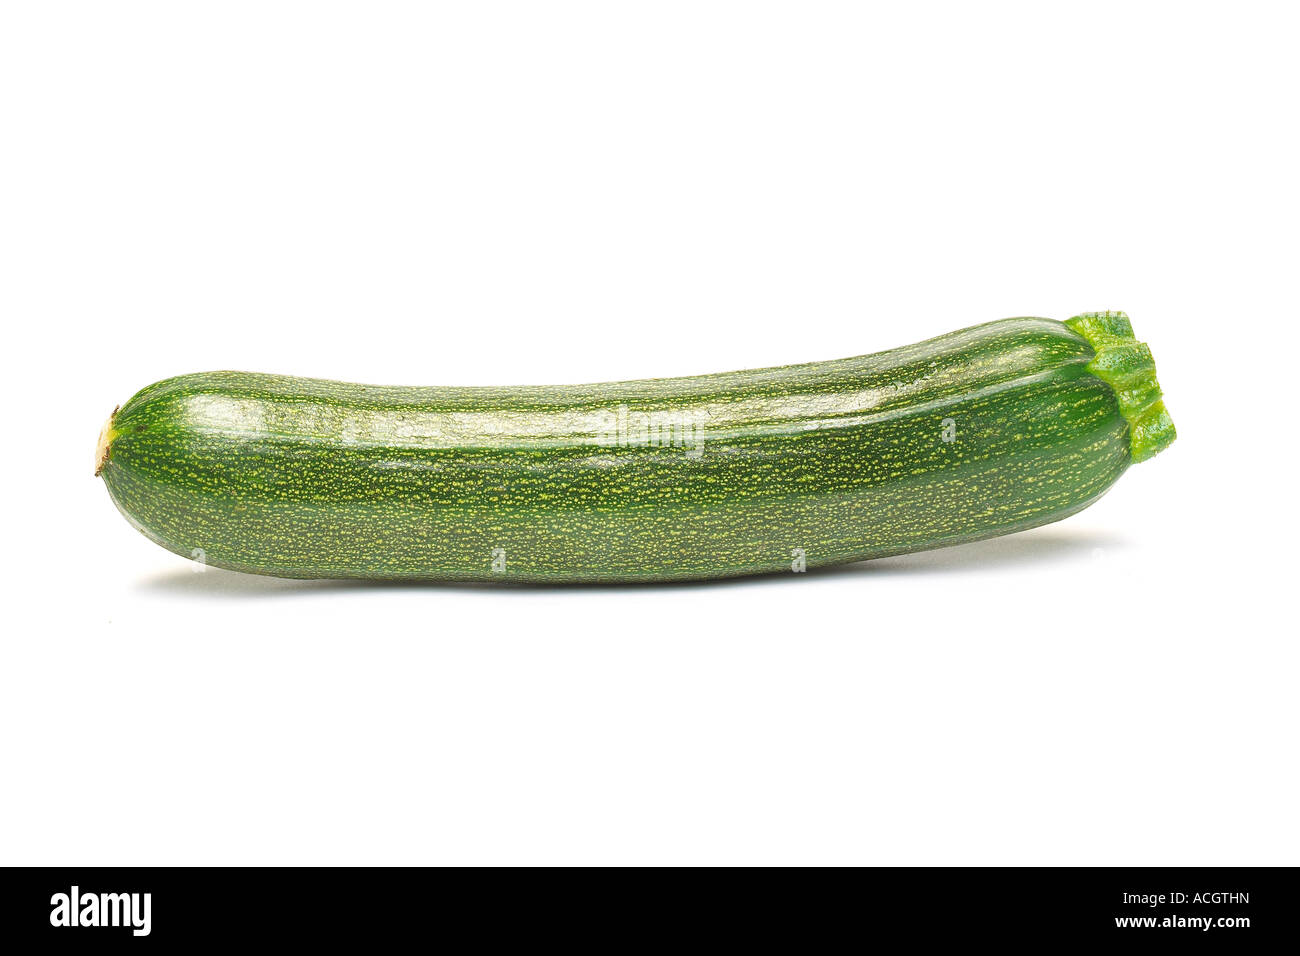 A fresh ripe green whole courgette on white background Stock Photo